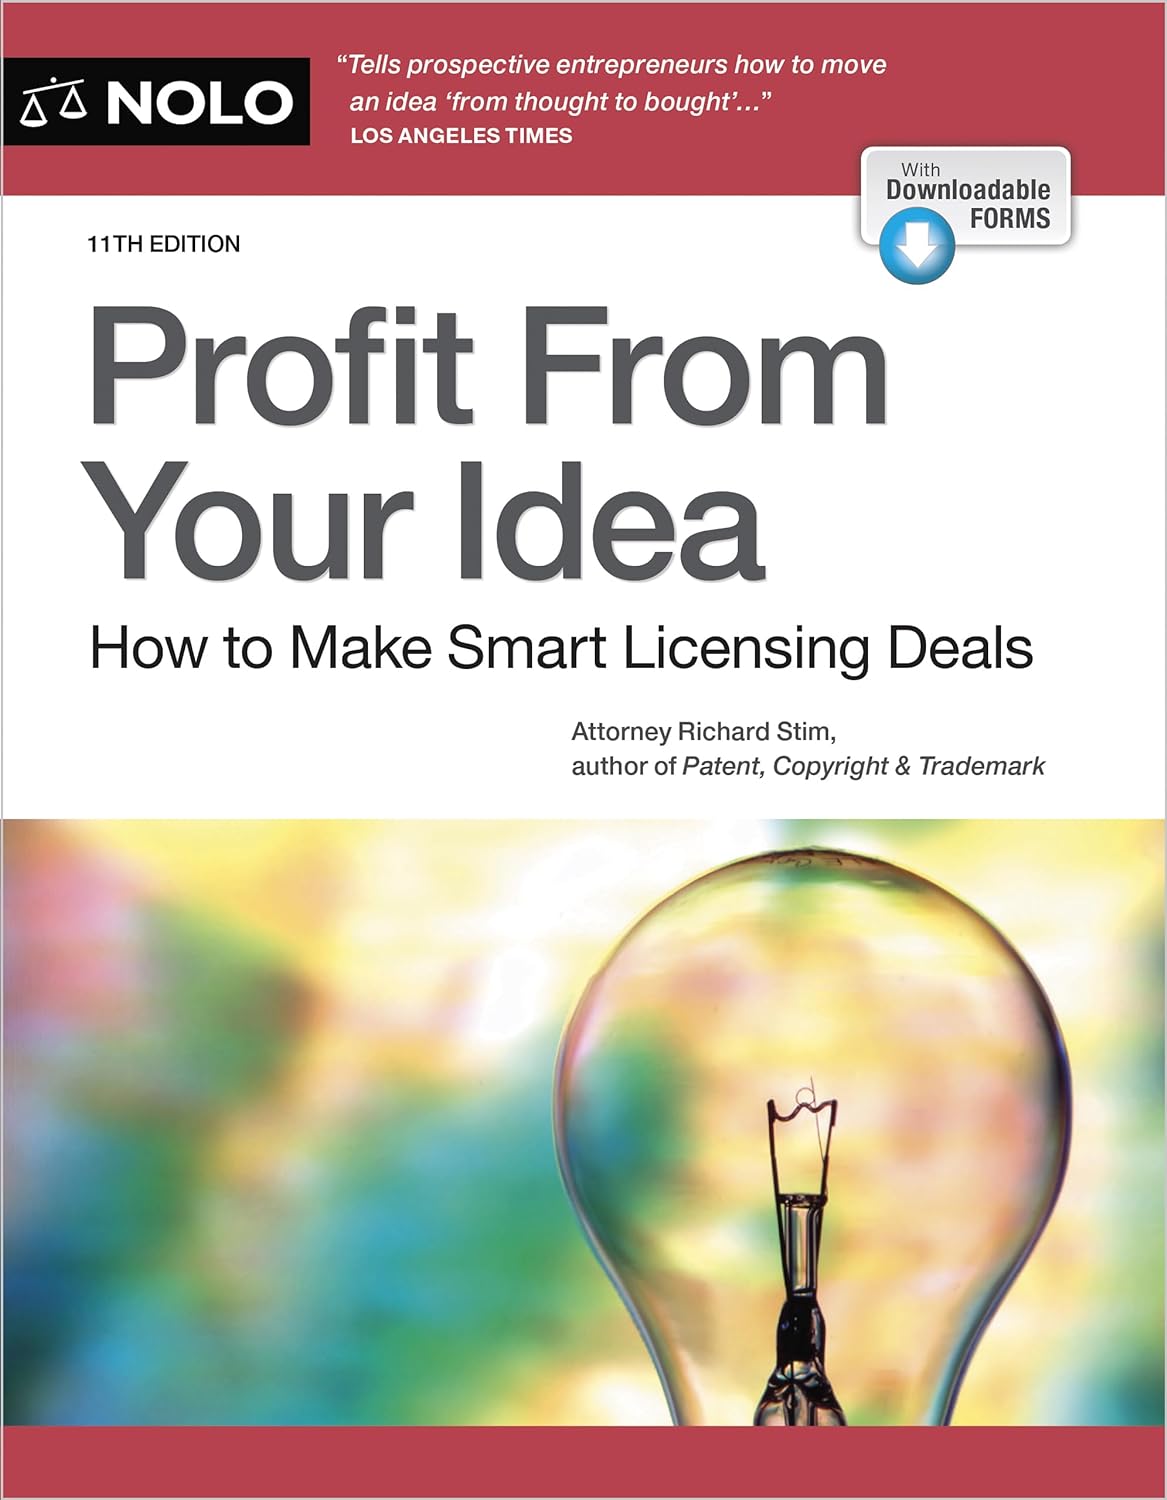 Profit from Your Idea How to Make Smart Licensing Deals (11TH ed.) - SureShot Books Publishing LLC